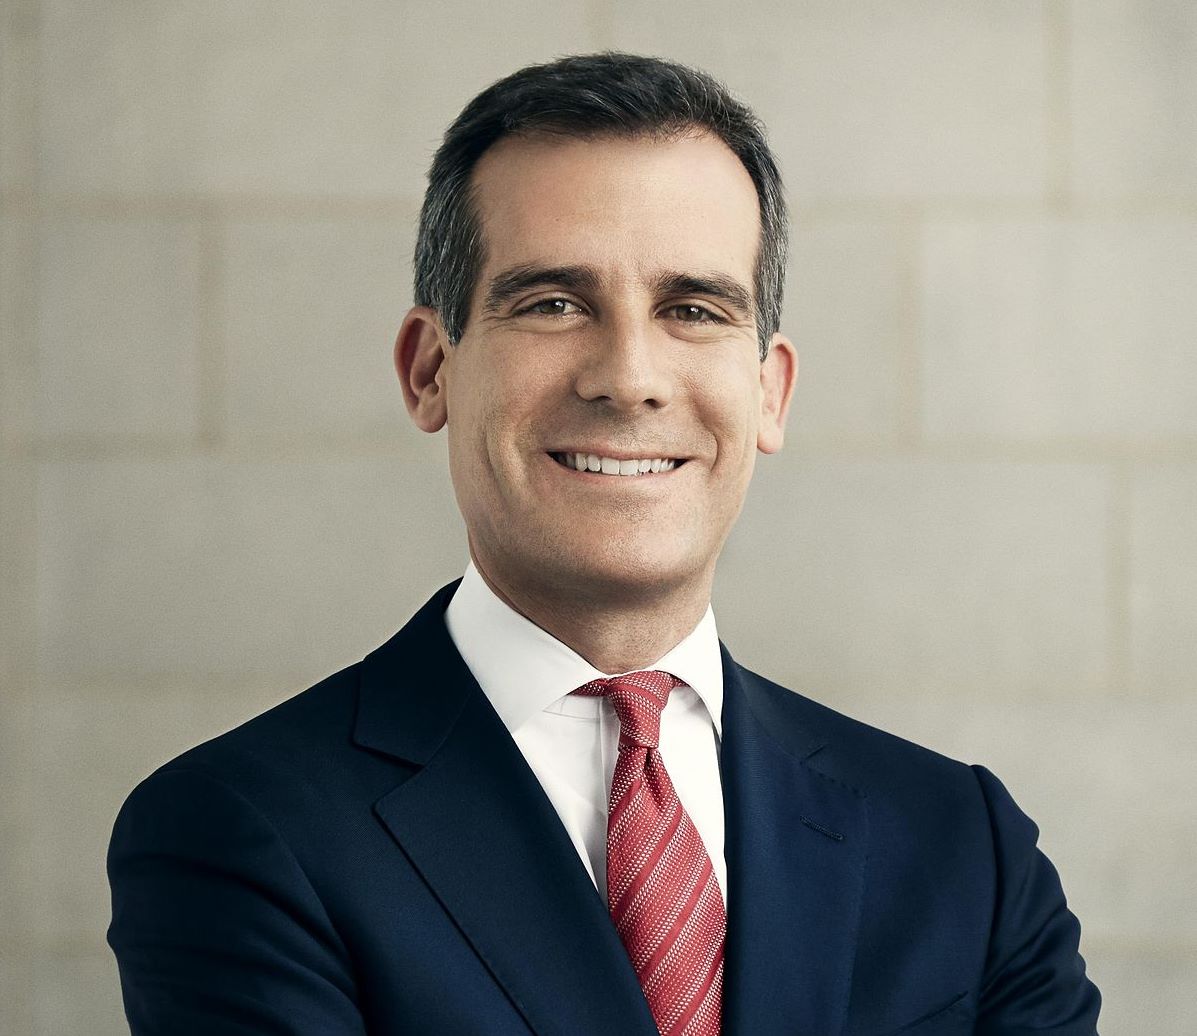 LA democrat mayor Eric Garcetti sends American tax payer dollars to Germany for cars that go largely unused